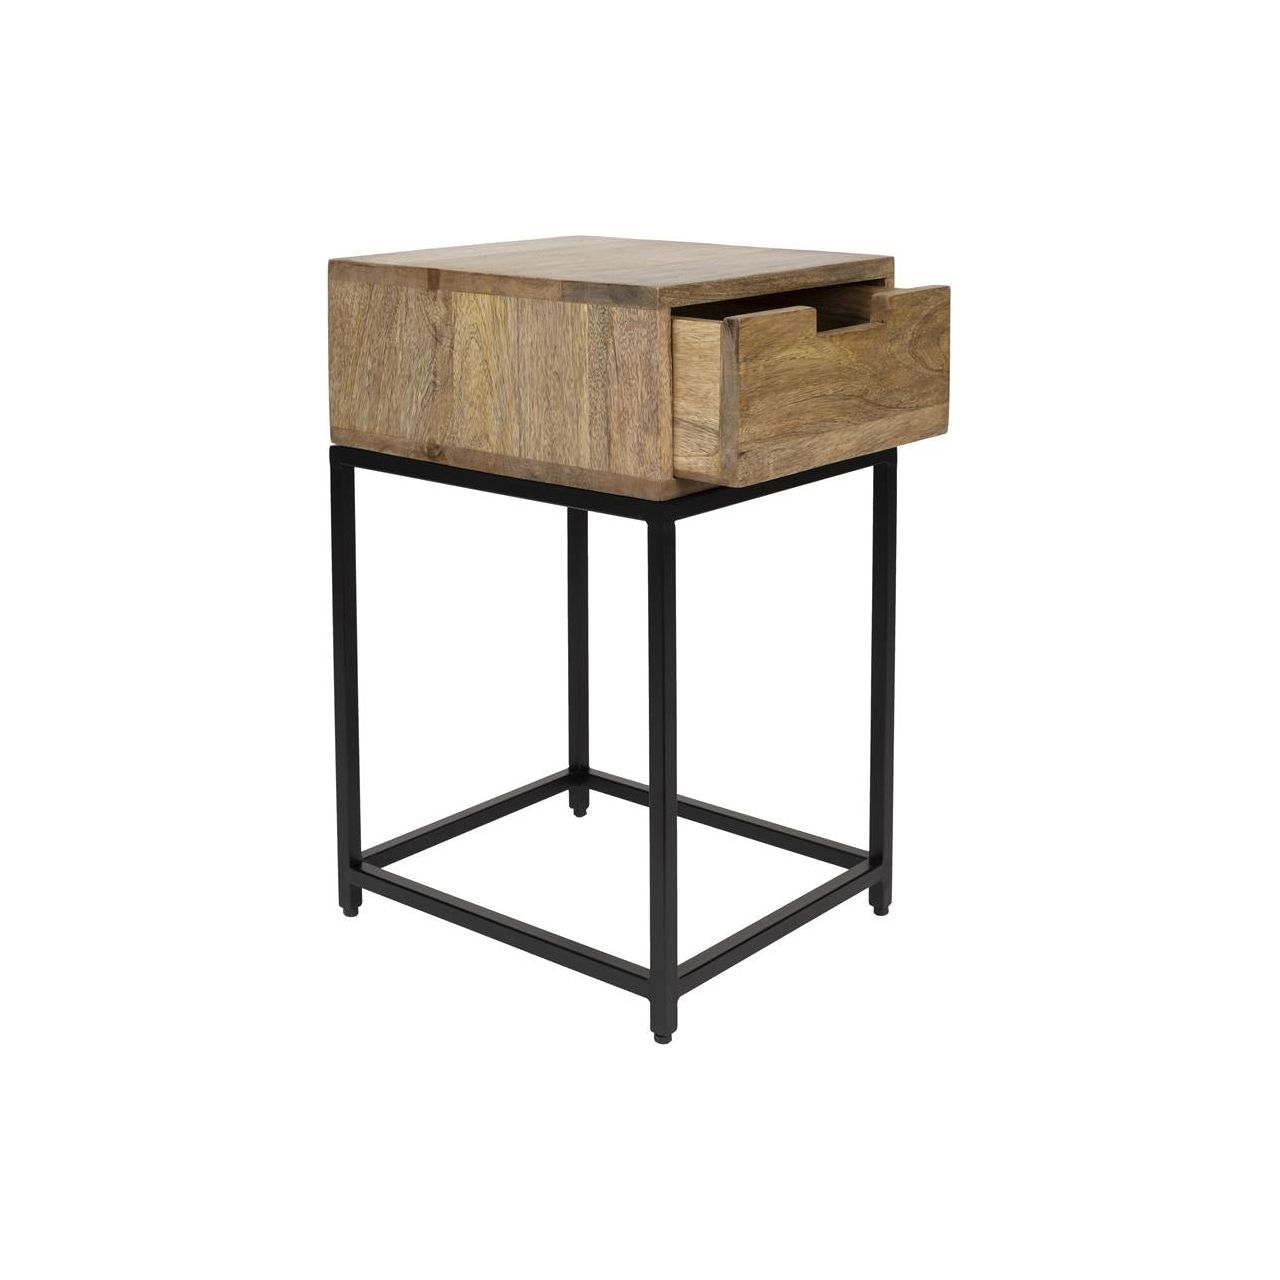 Sidetable/bed stand parcq natural